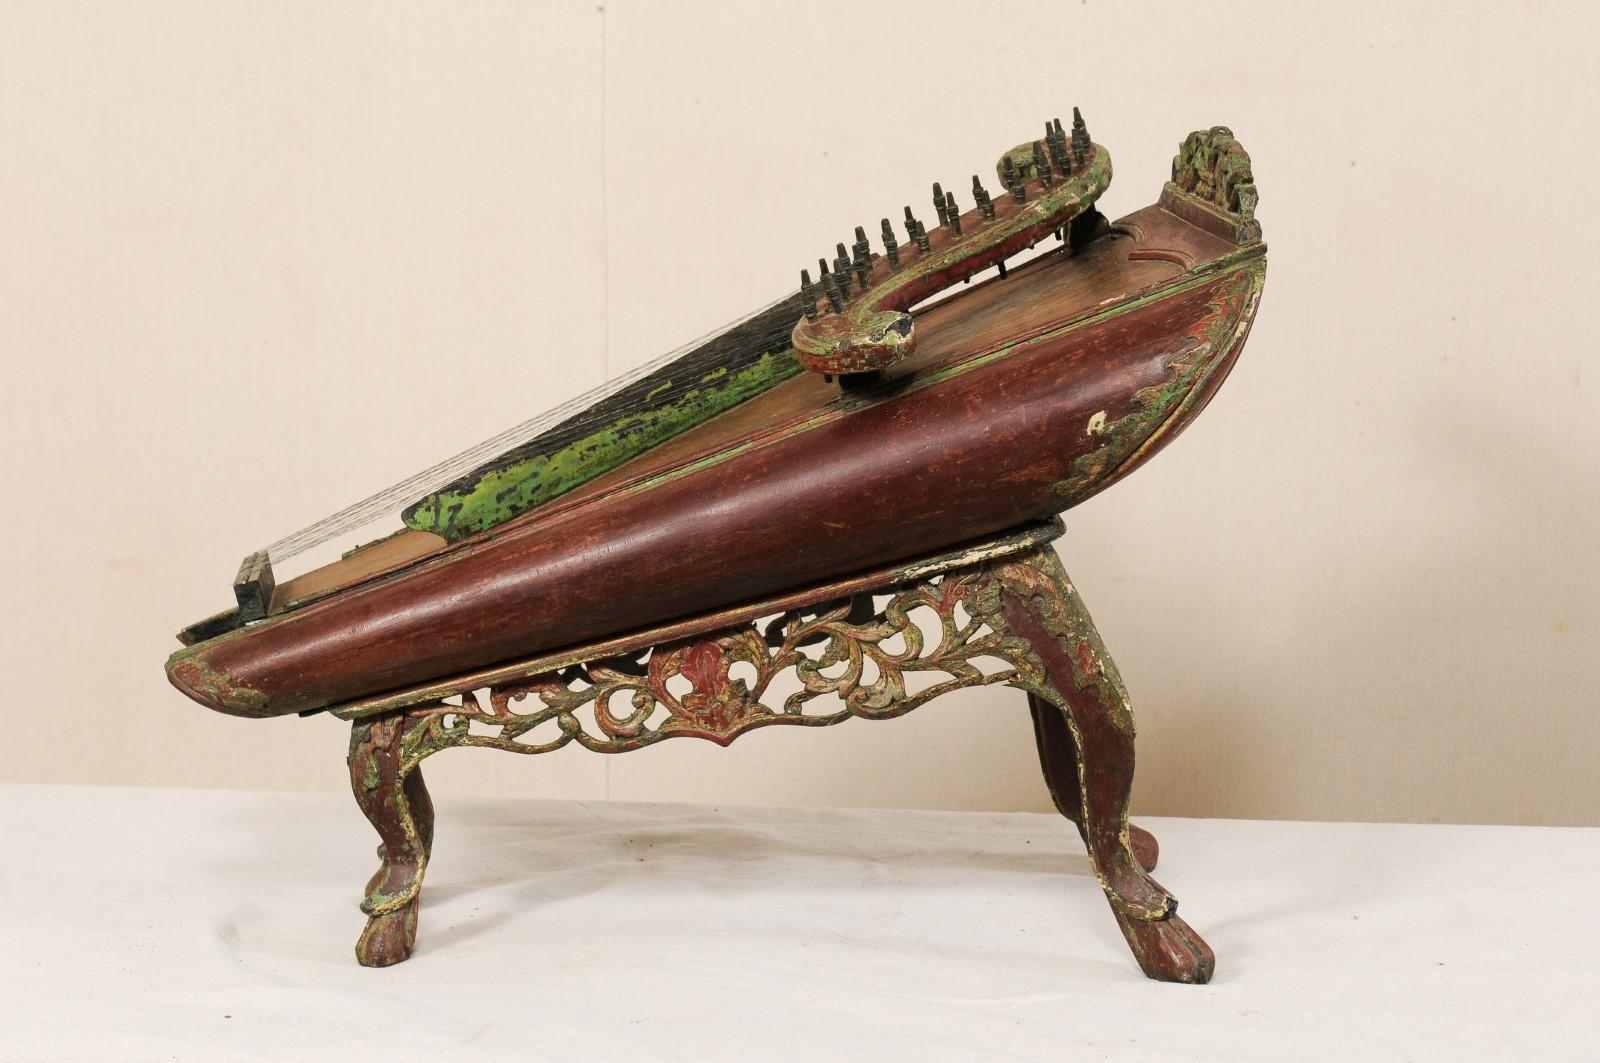 Carved 19th Century Celempung Musical Instrument from Java, Indonesia